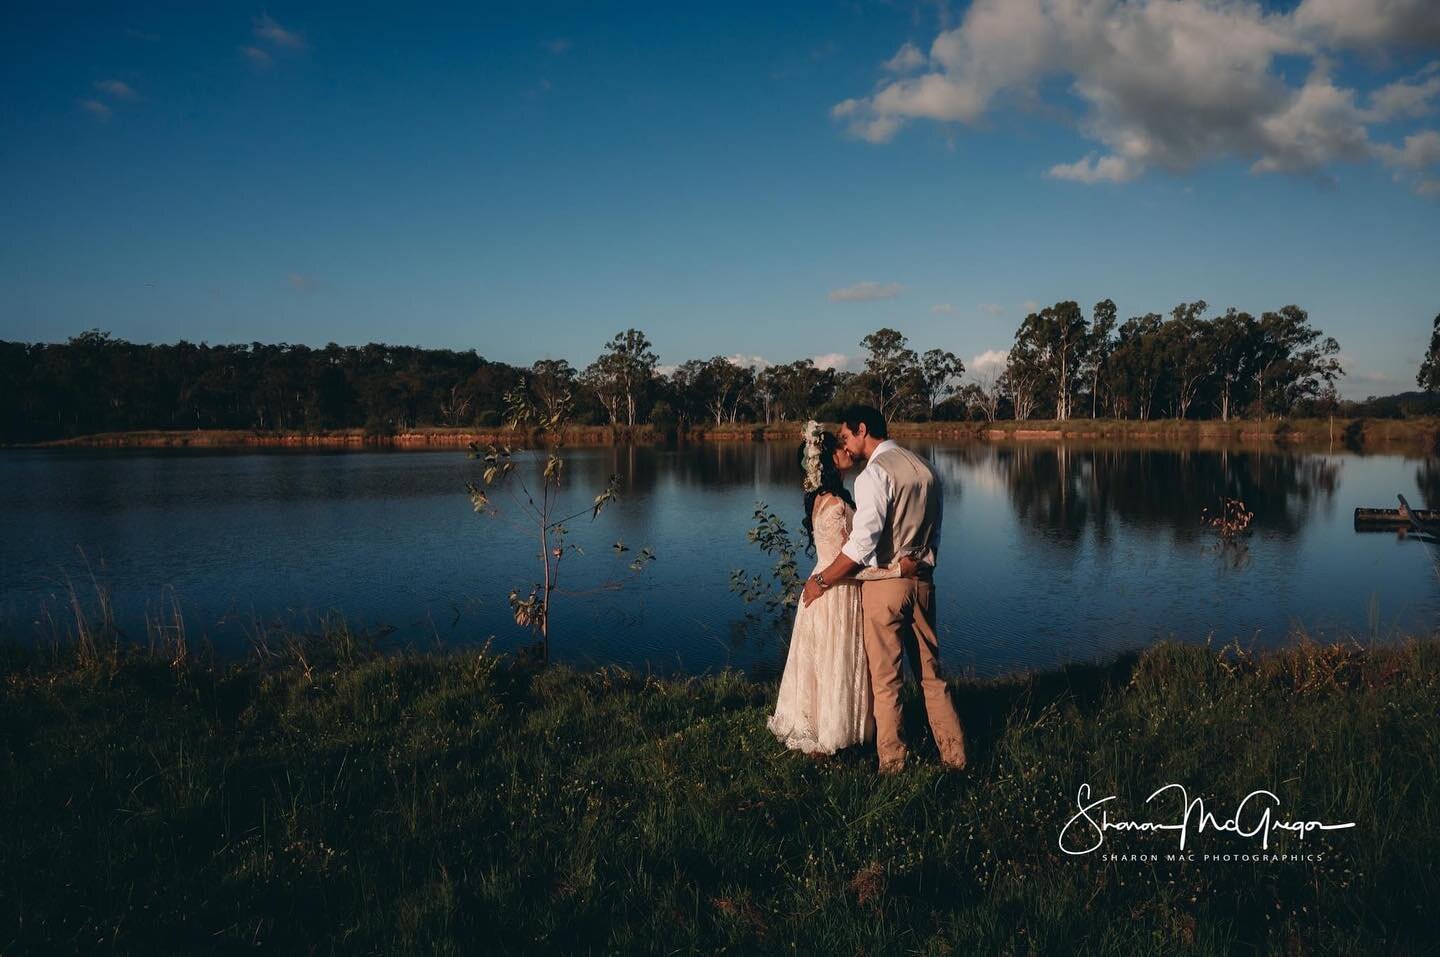 The property at Mt Hallen (Esk), QLD, where this couple got married had it all, rolling hills, beautiful bushland, orchards and this beautiful dam, which luckily had receded a little after the floods so we could access it and get images right next to